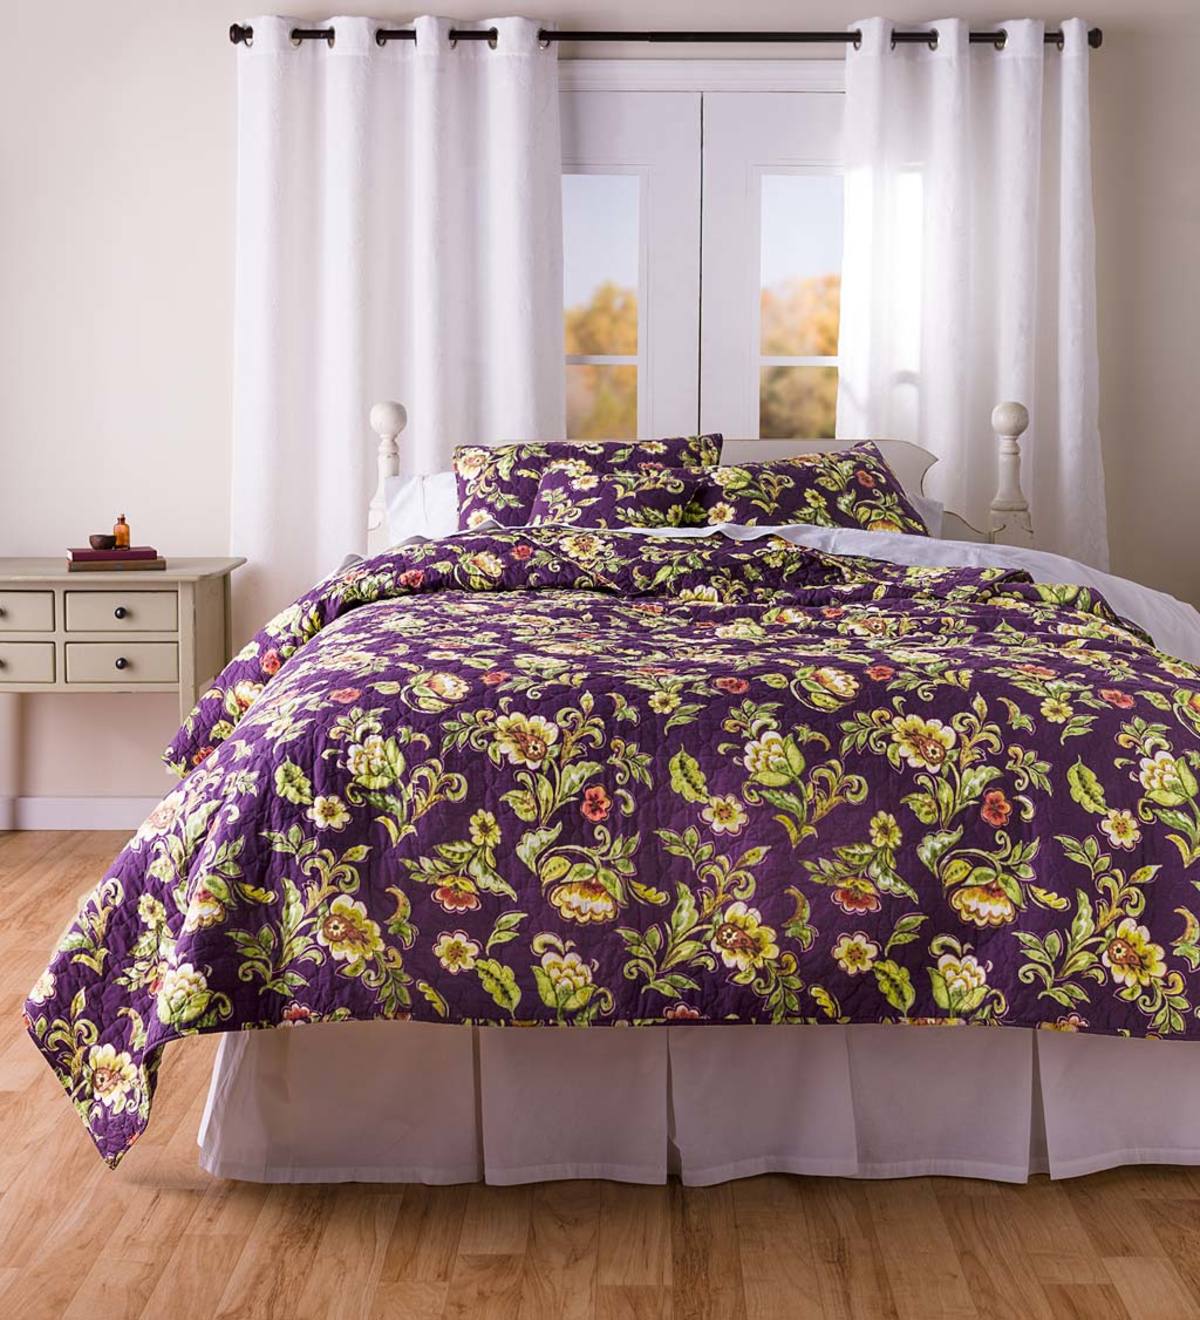 Delilah Floral Full/Queen Quilt Set with Two Standard Shams